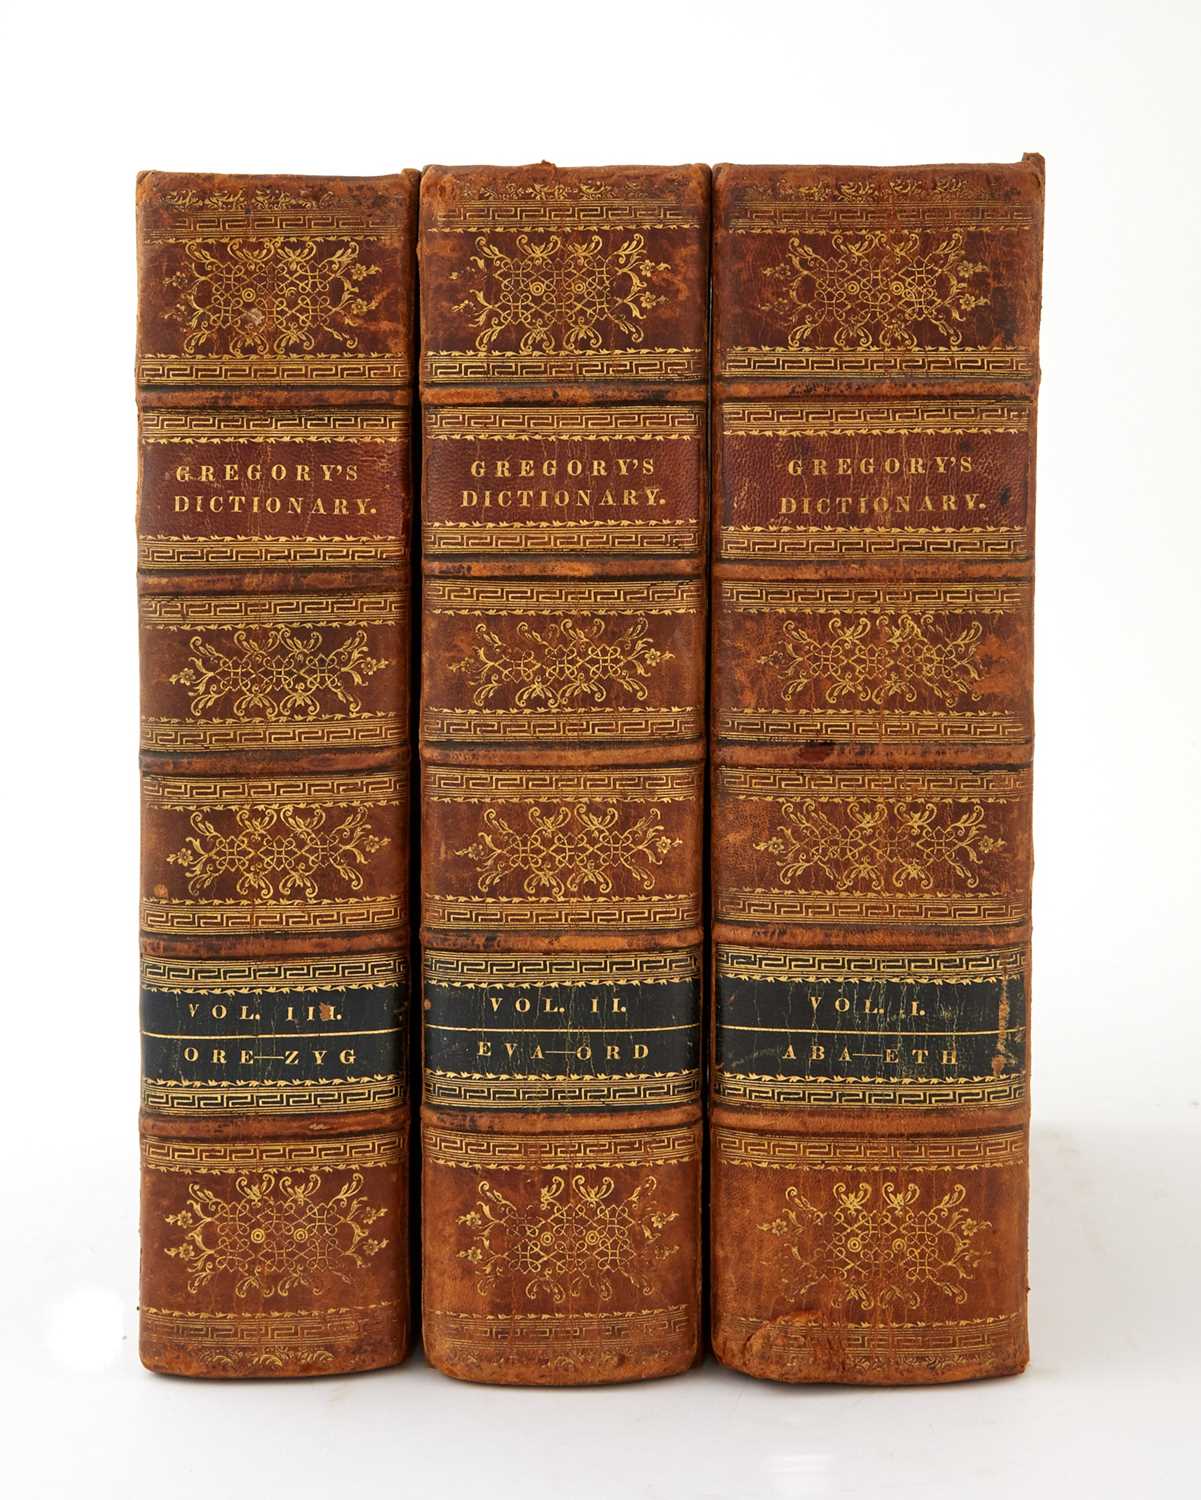 Lot 30 - GREGORY, G.
A New and Complete Dictionary of Arts and Sciences Including the latest Improvement and Discovery and the Present State of every branch of Human Knowledge.